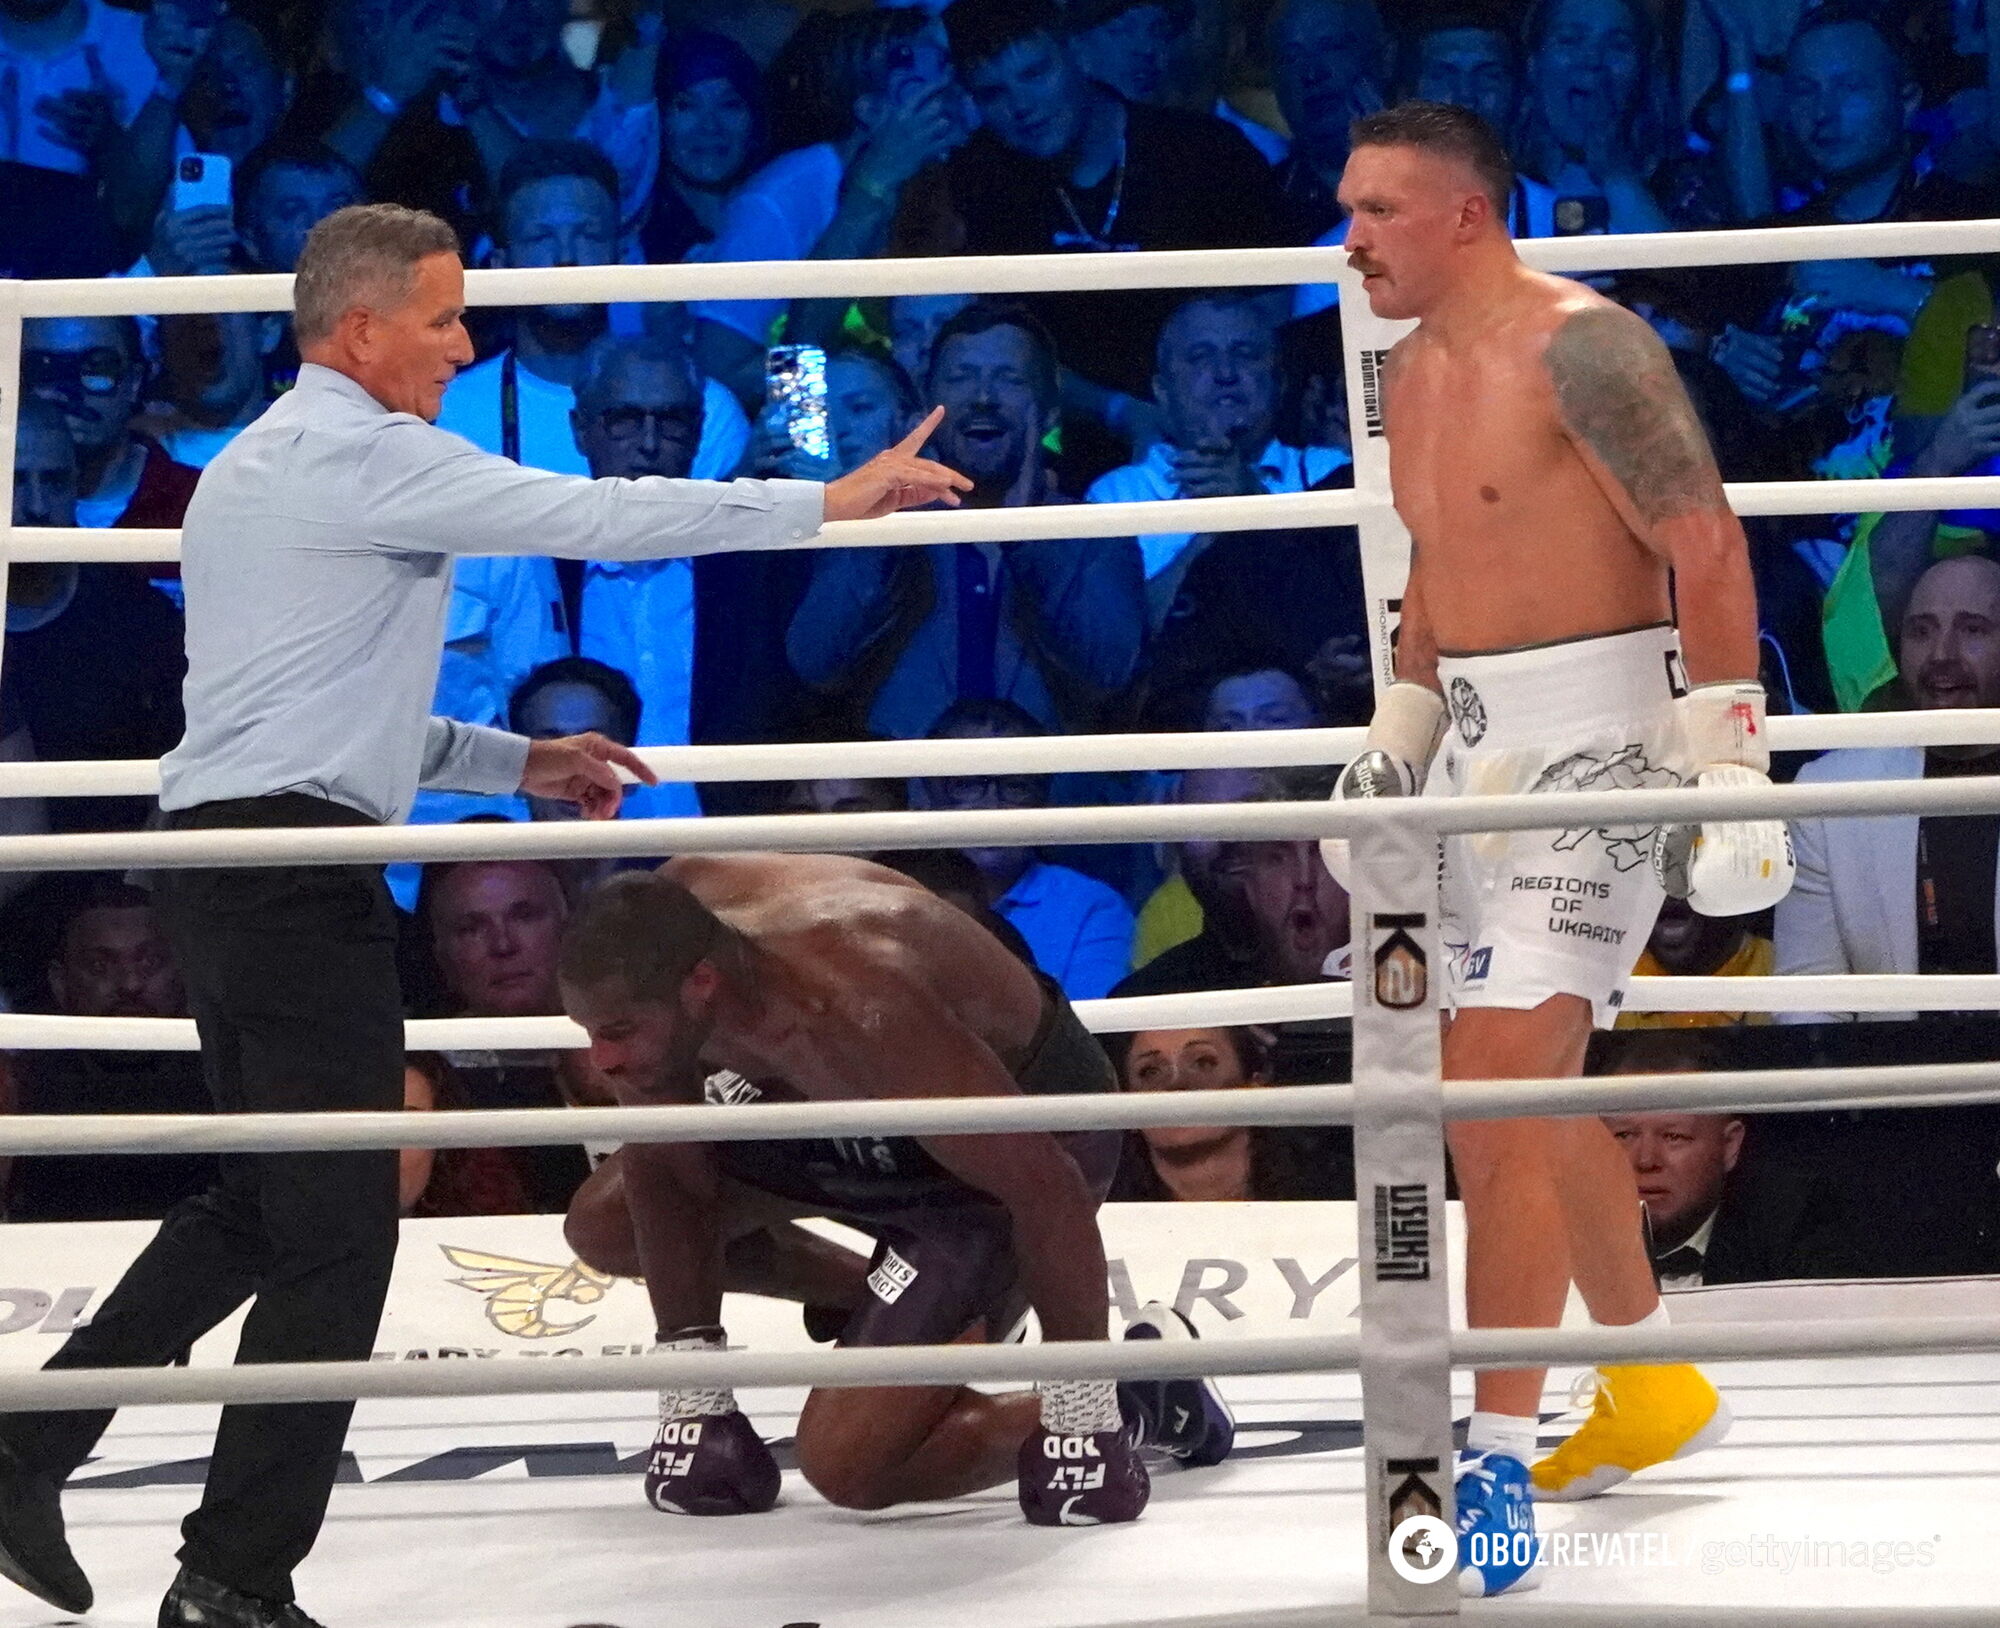 ''He proved it'': boxing legend from Russia speaks about Usyk's victory over Dubois